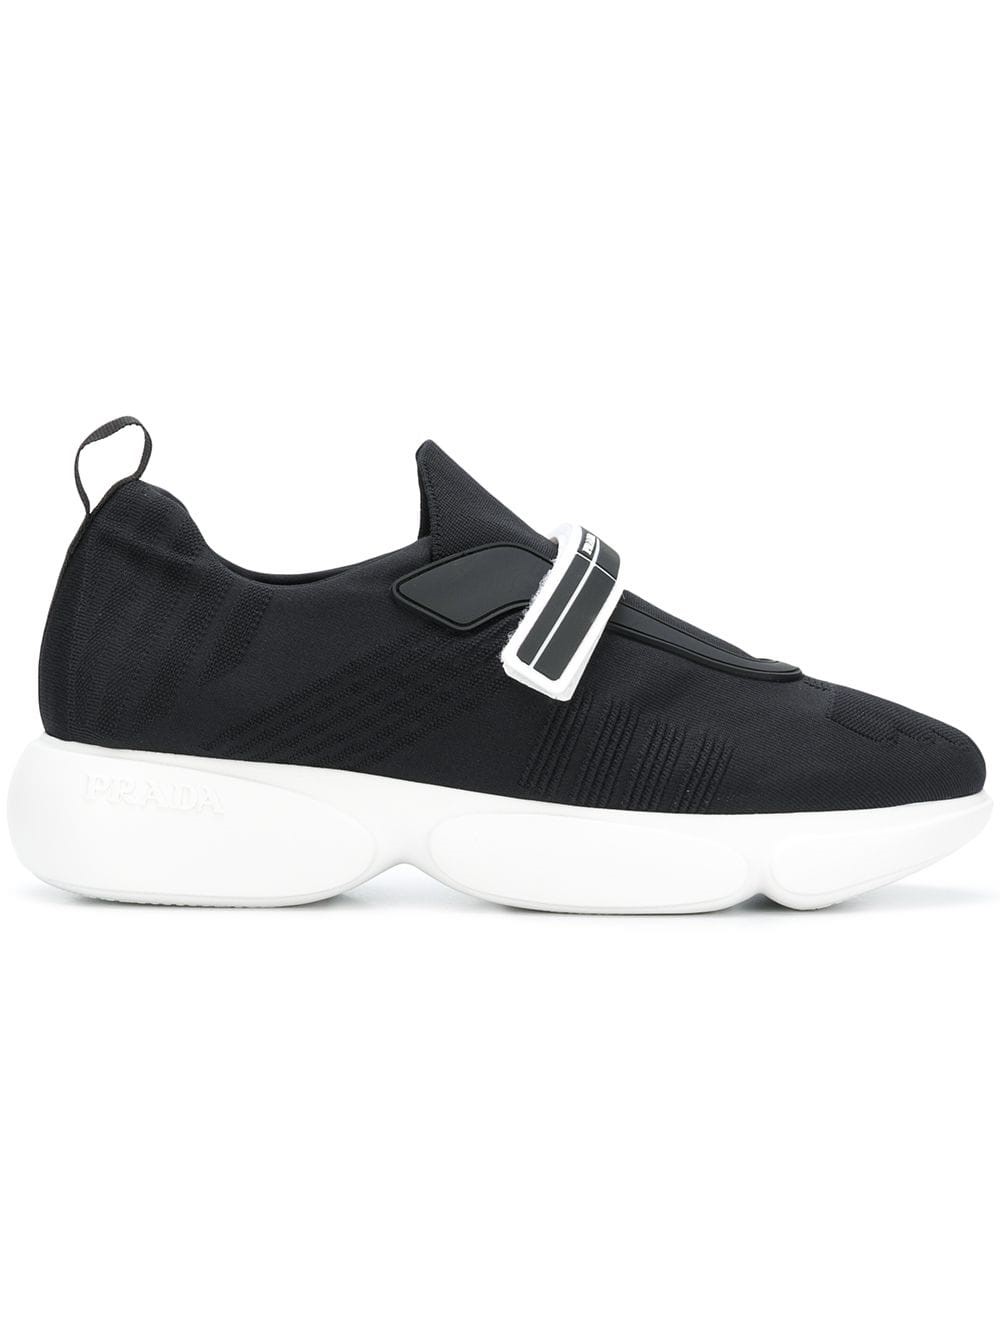 prada CLOUDBUST SNEAKERS available on montiboutique.com - 24890